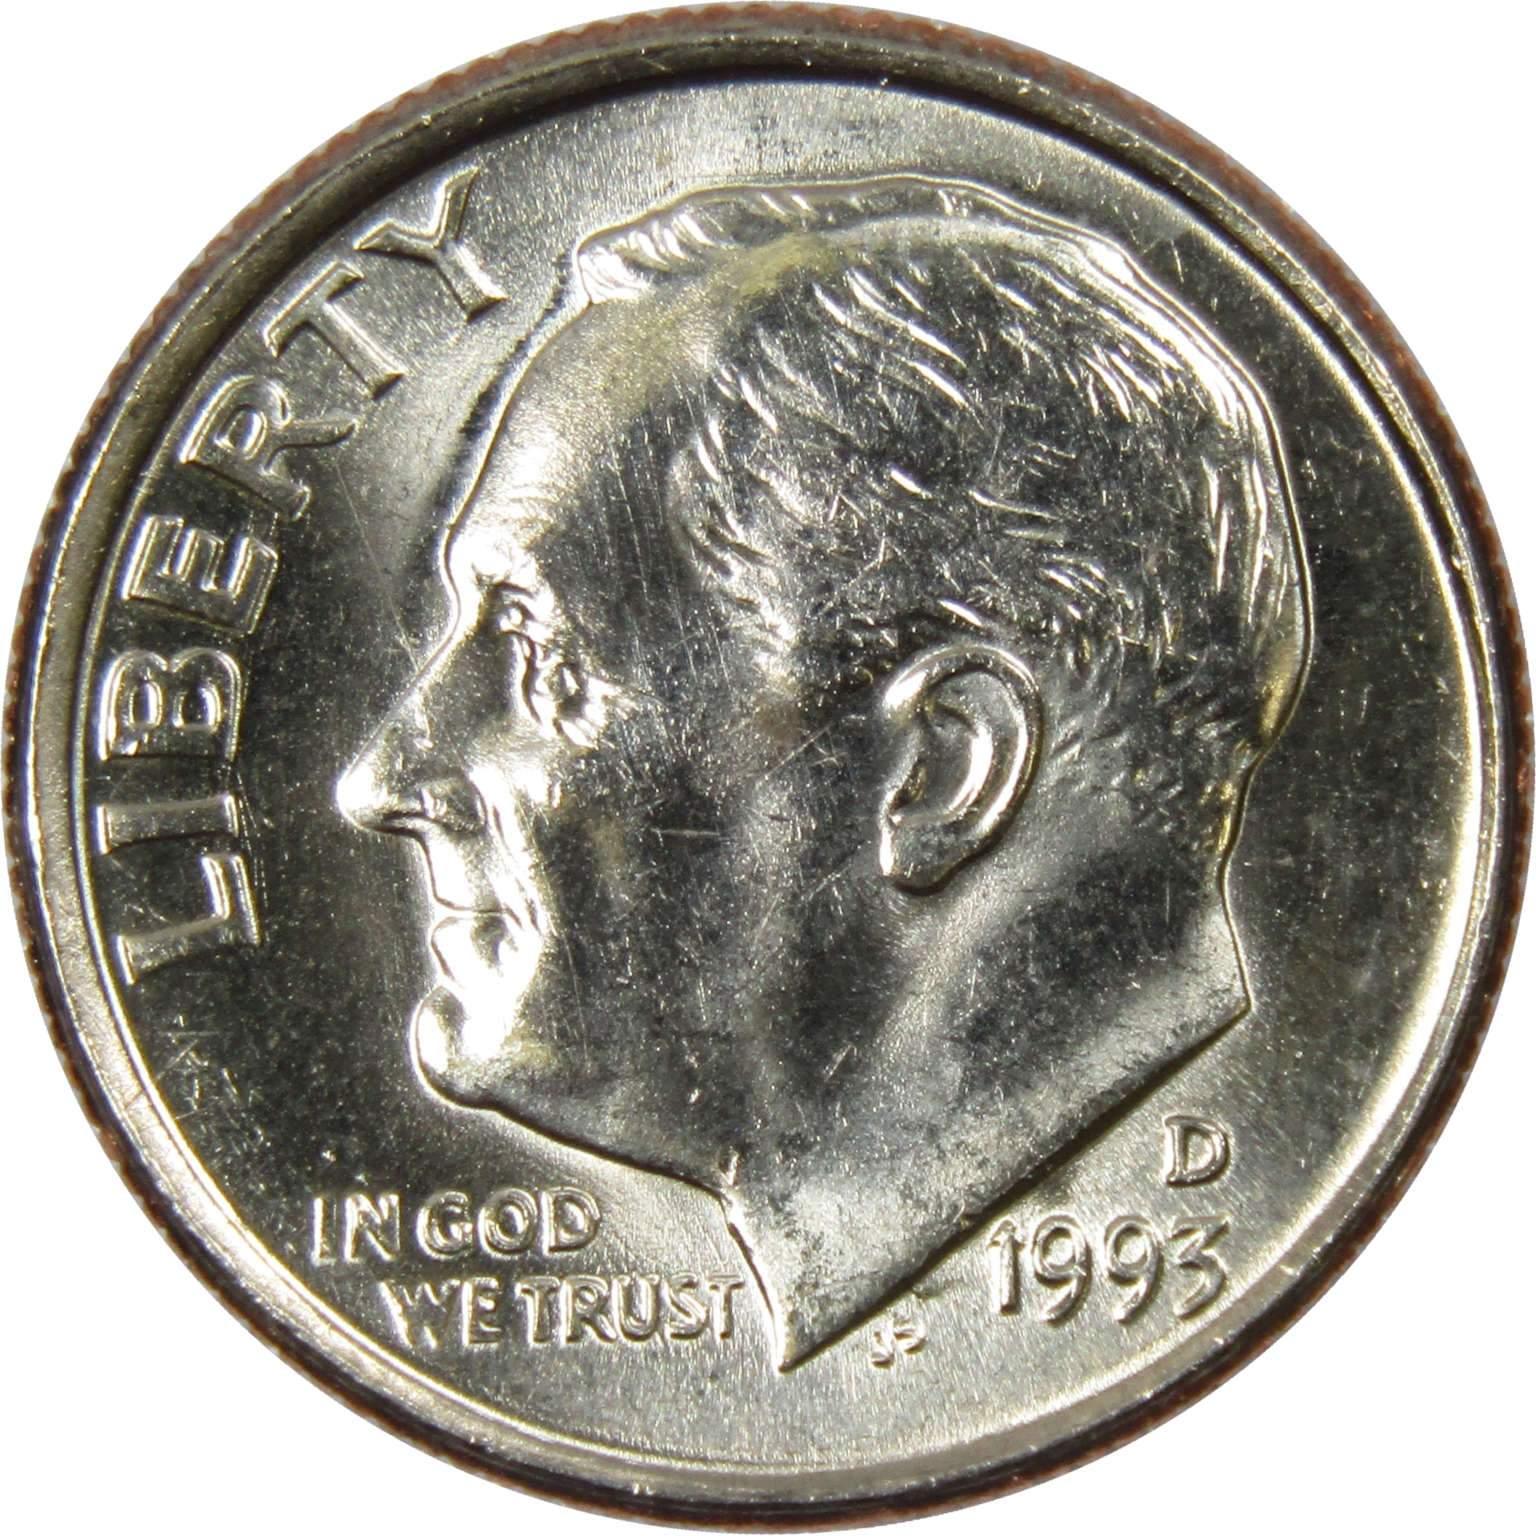 1993 D Roosevelt Dime BU Uncirculated Mint State 10c US Coin Collectible